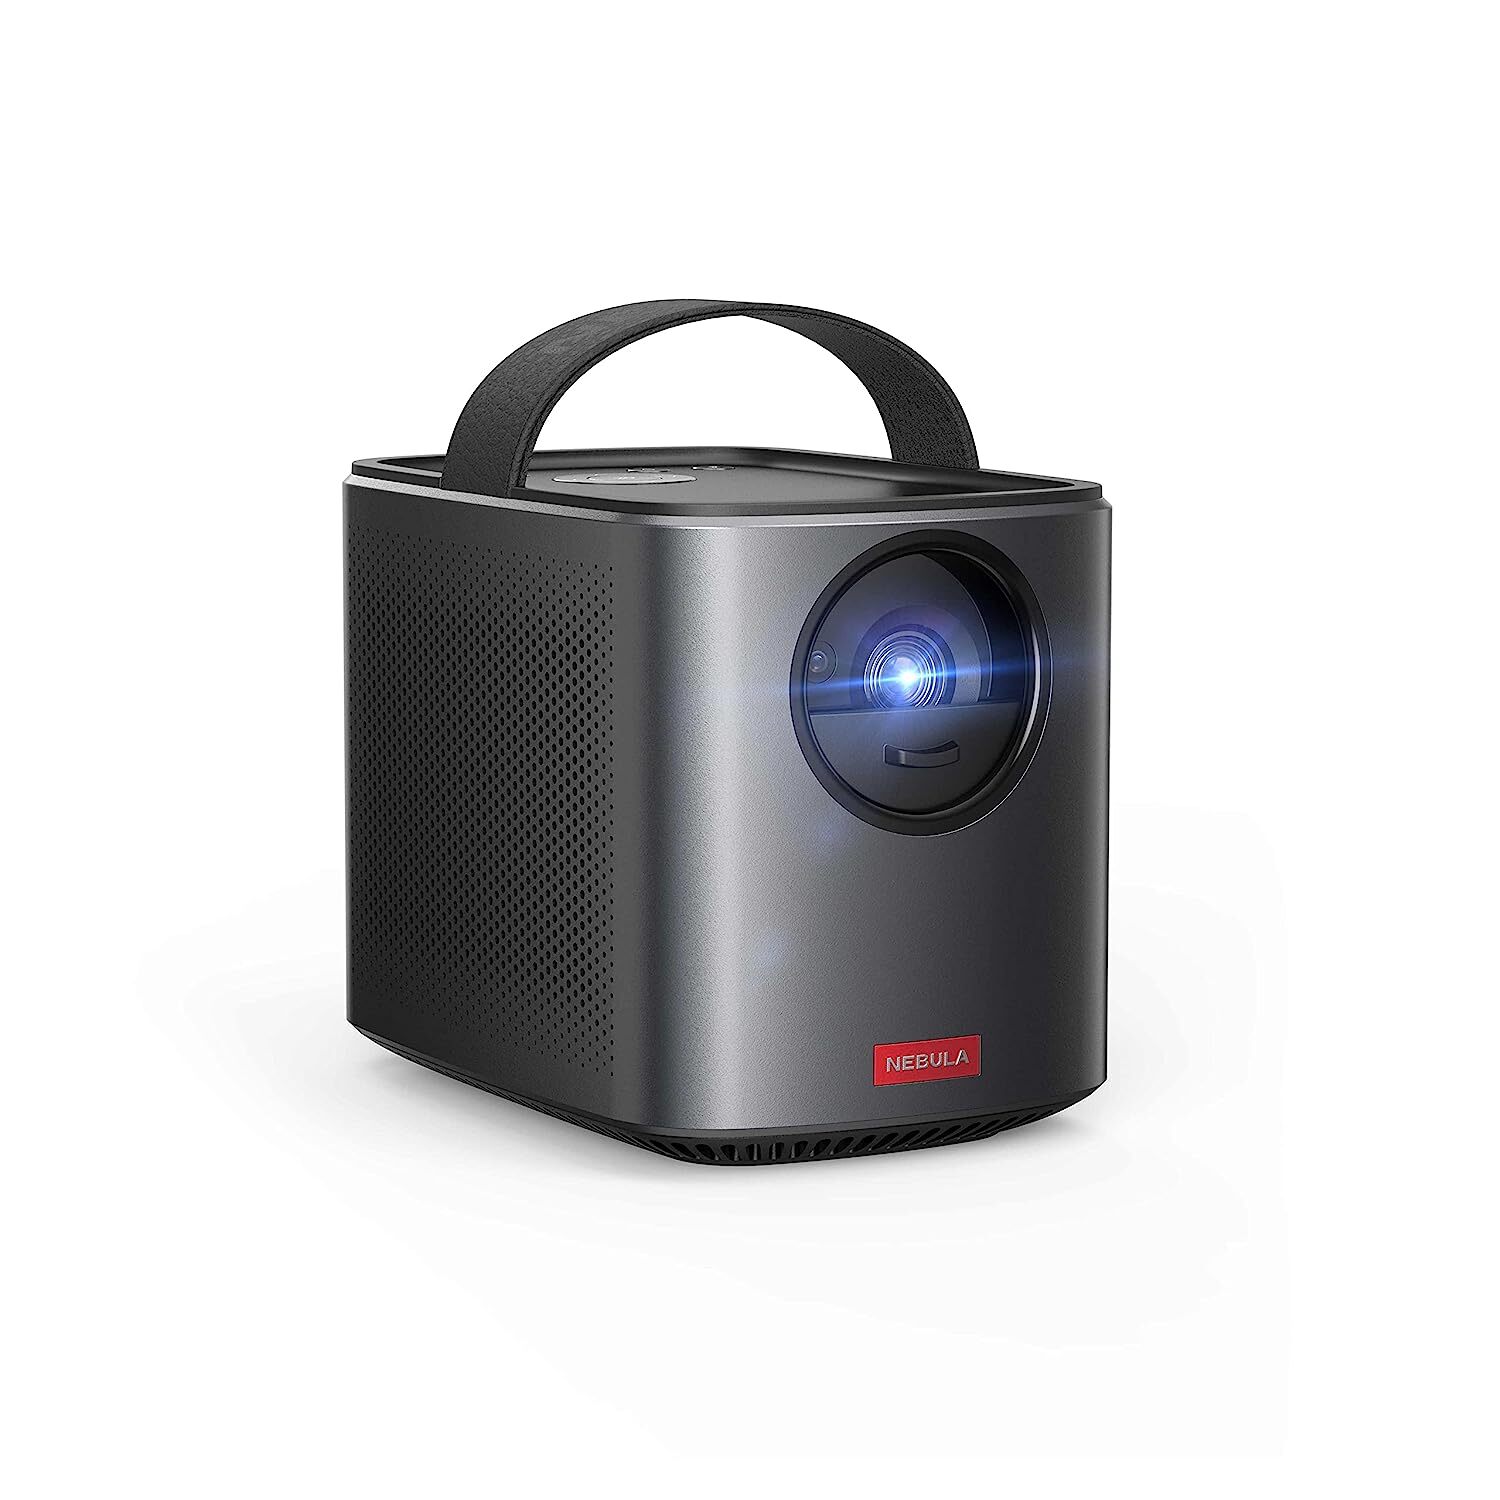 Nebula Mars II Pro 500 ANSI Lumen Portable Projector, Black, 720p Image, Video Projector, 30 to 150 Inch Image TV Projector, Movie Projector, Home Entertainment